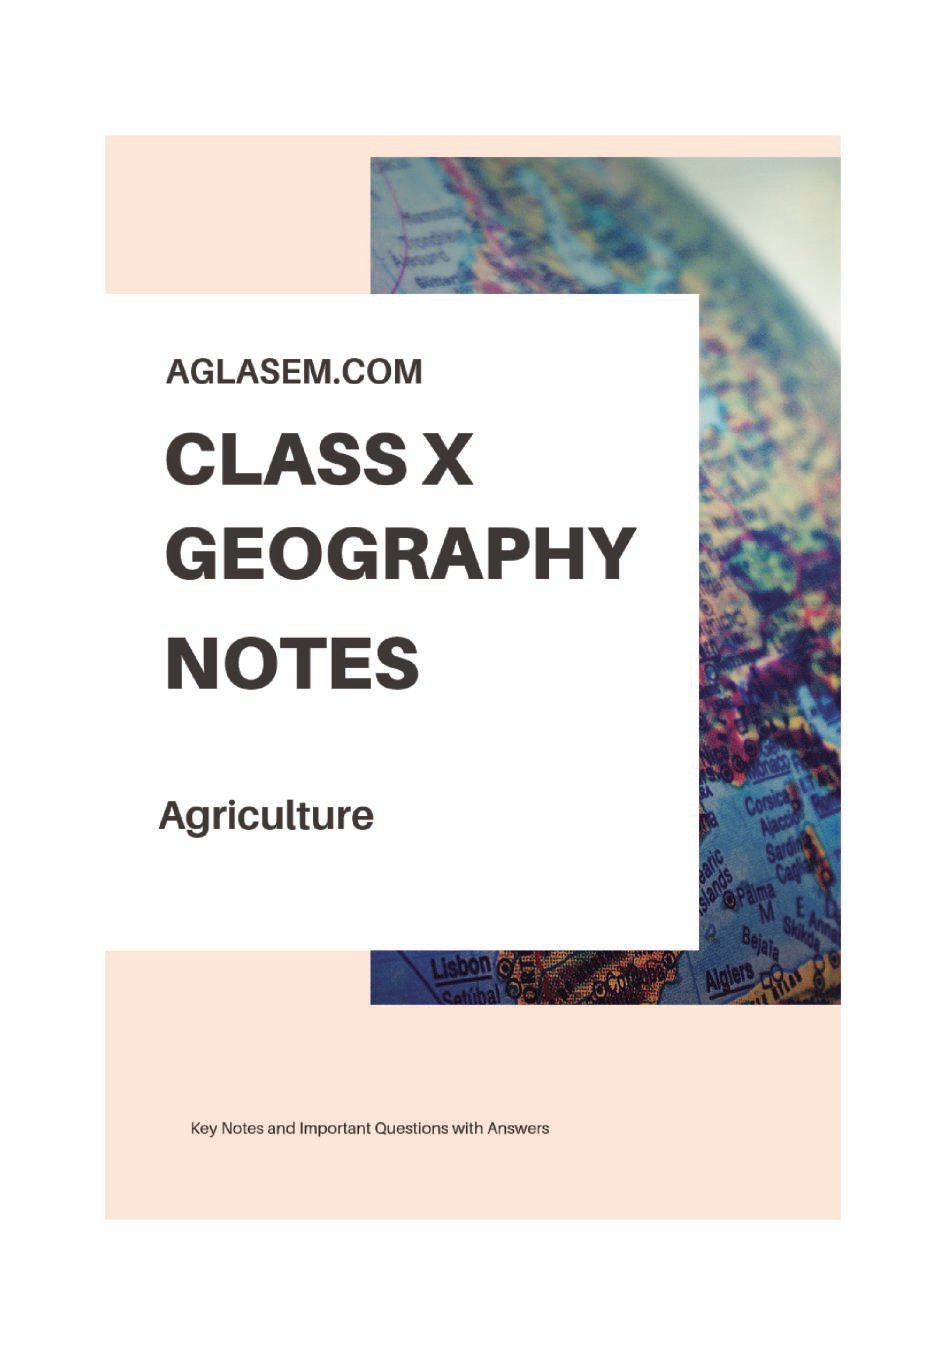 Class 10 Social Science Geography Notes for Agriculture - Page 1